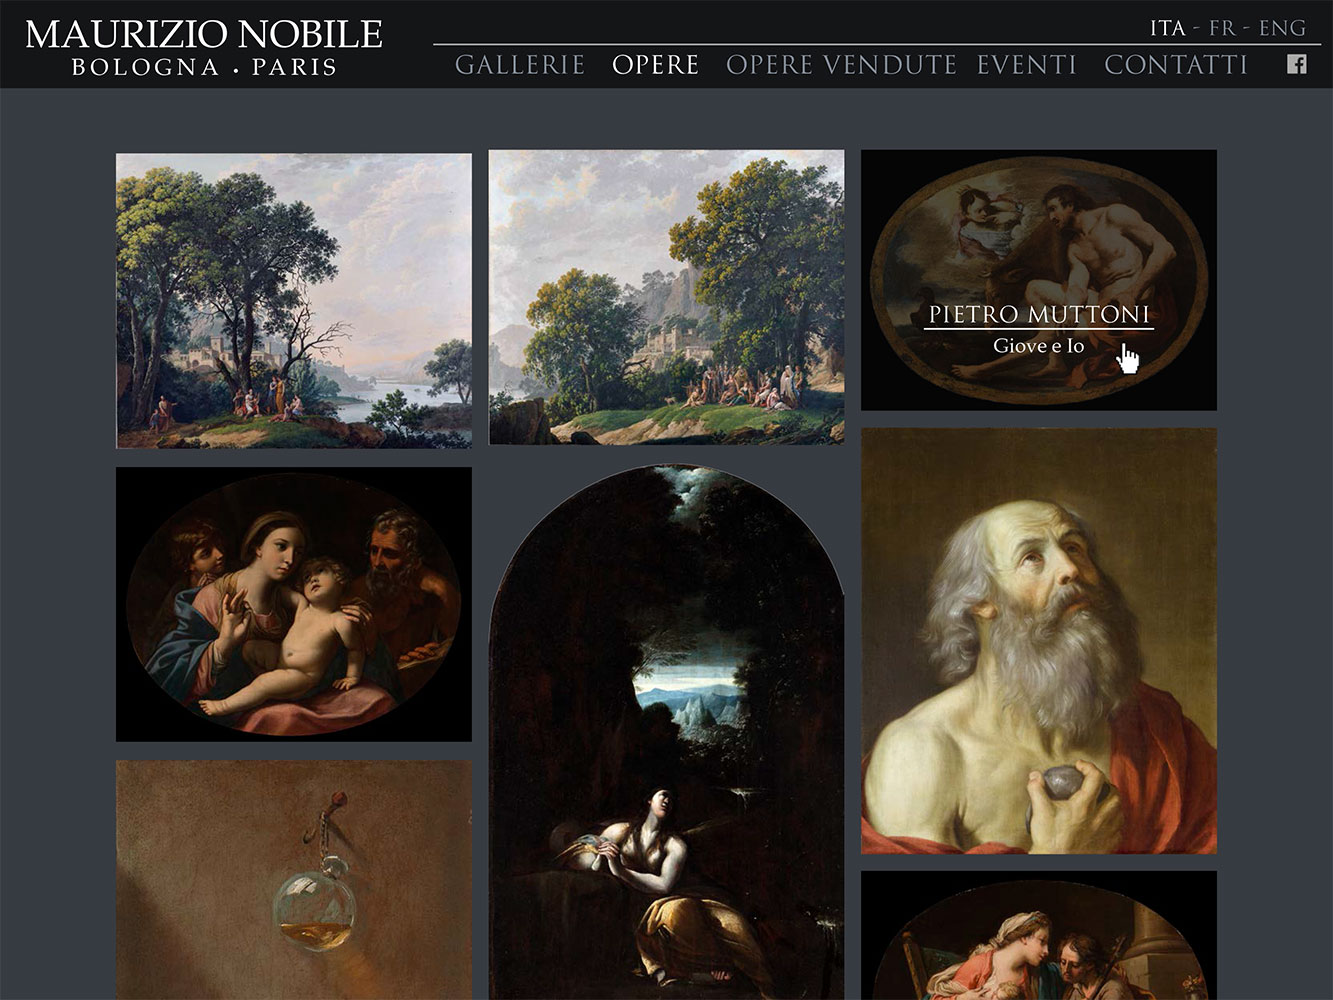 UI design of the Artworks page for M. Nobile